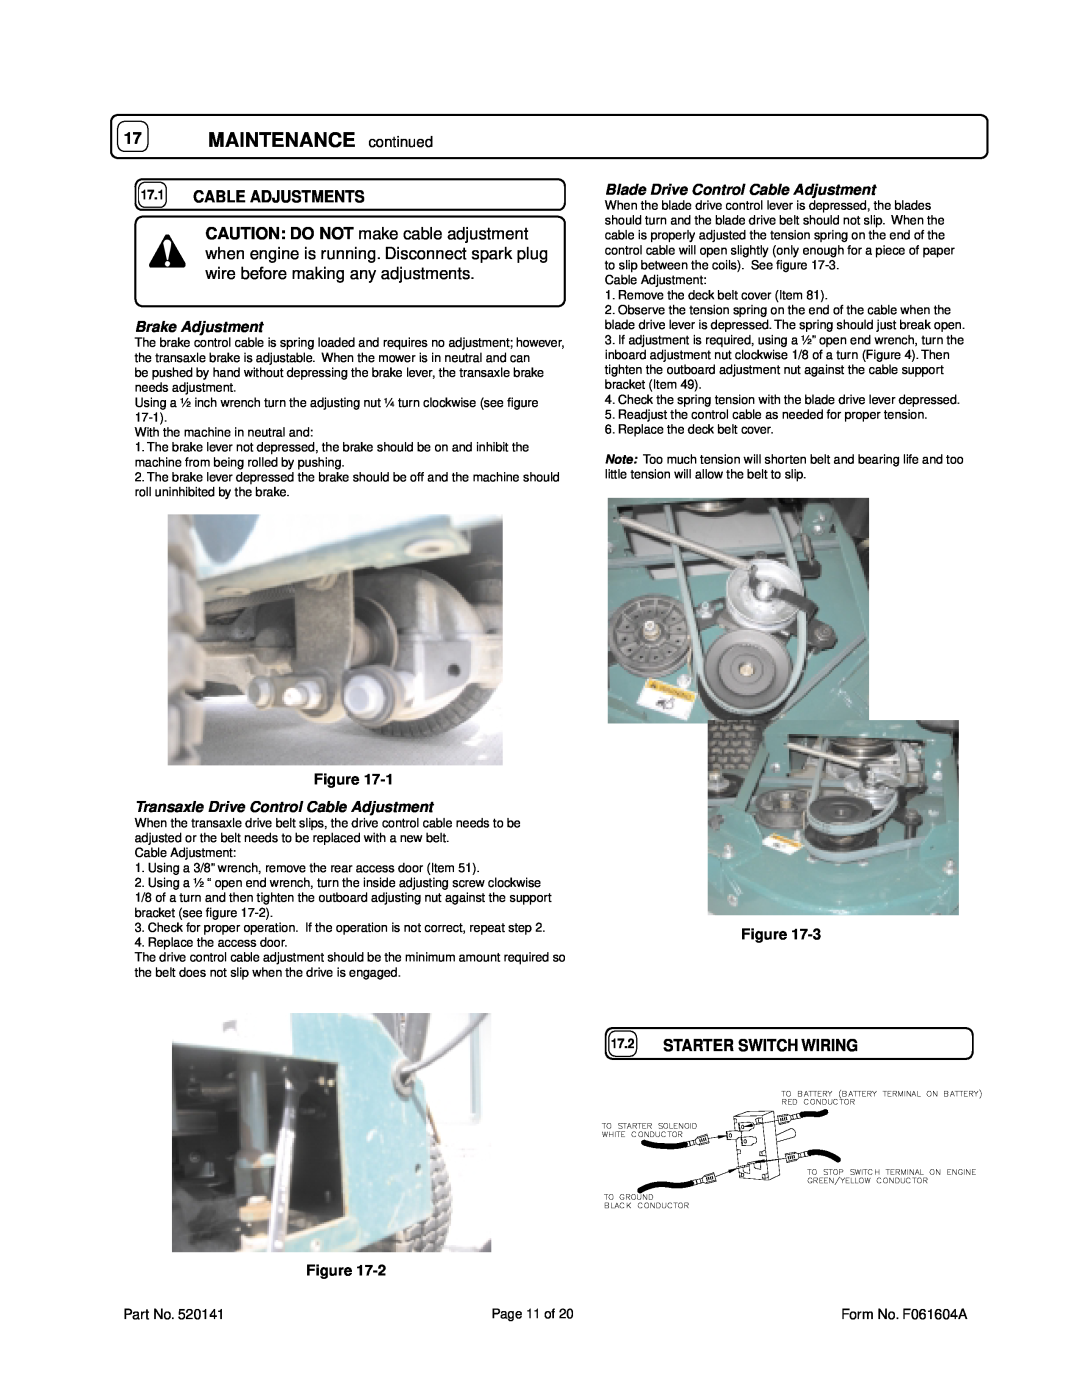 Billy Goat FM3300E owner manual MAINTENANCE continued, Cable Adjustments, Starter Switch Wiring, Brake Adjustment 